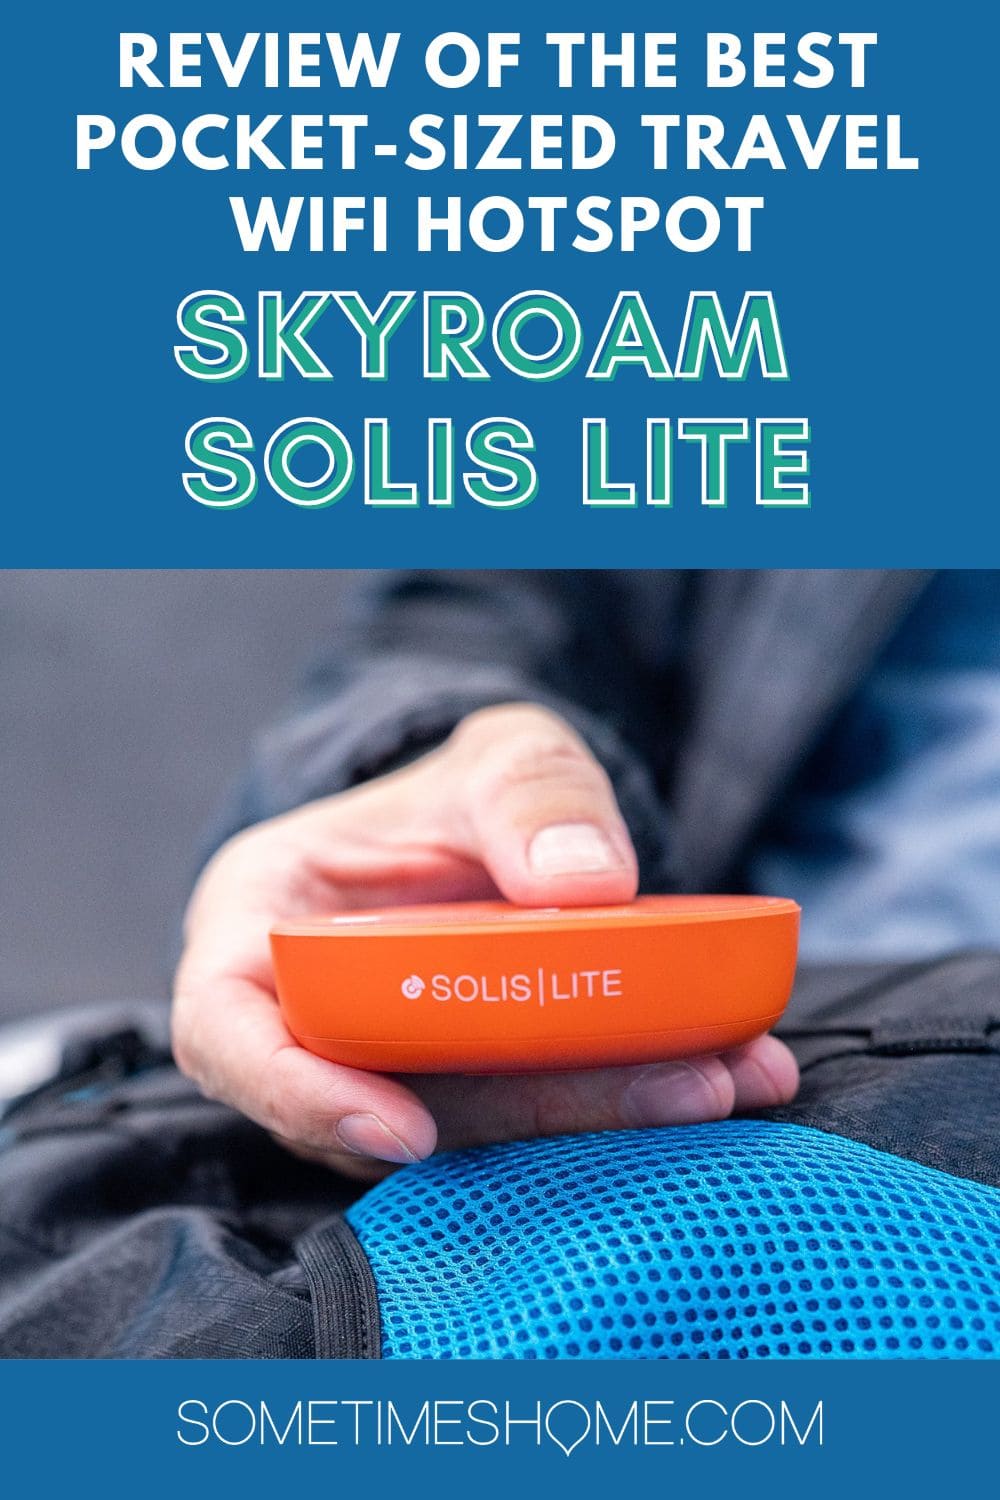 Review of the best pocket-sized travel wifi hotspot Skyroam Solis Lite with a picture of a hand holding the device.